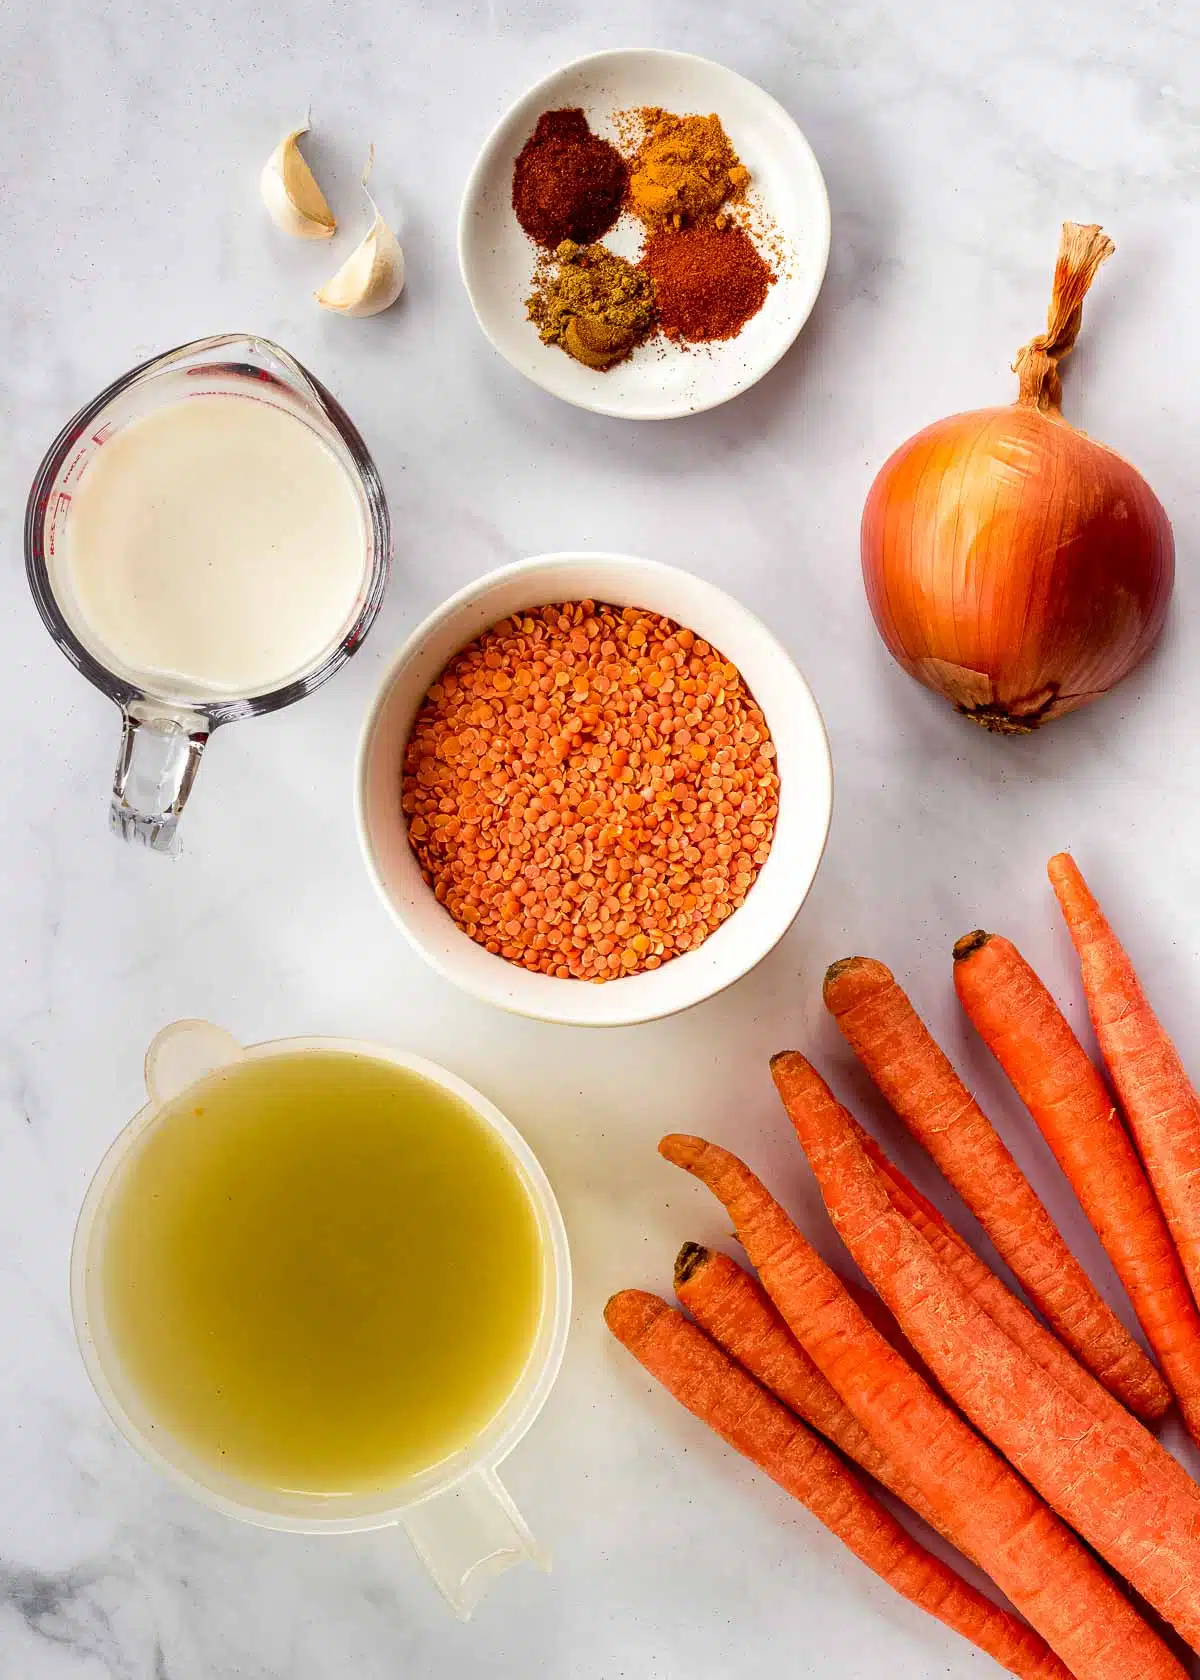 Ingredients for Lentil and Carrot Soup: red lentils, onion, garlic, carrots, broth, spices and milk.